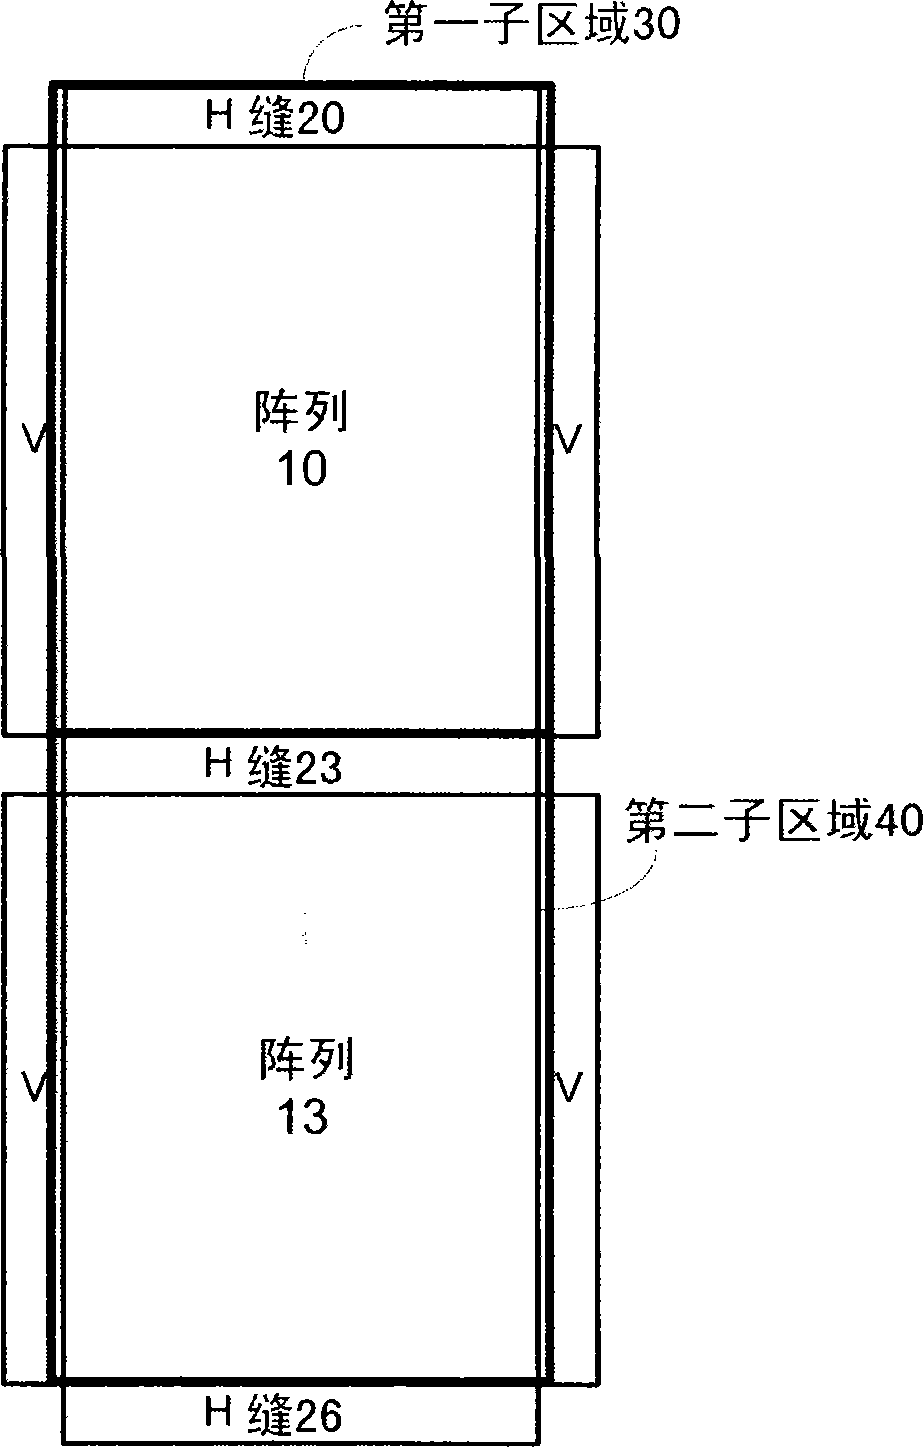 Method and system for evaluating object